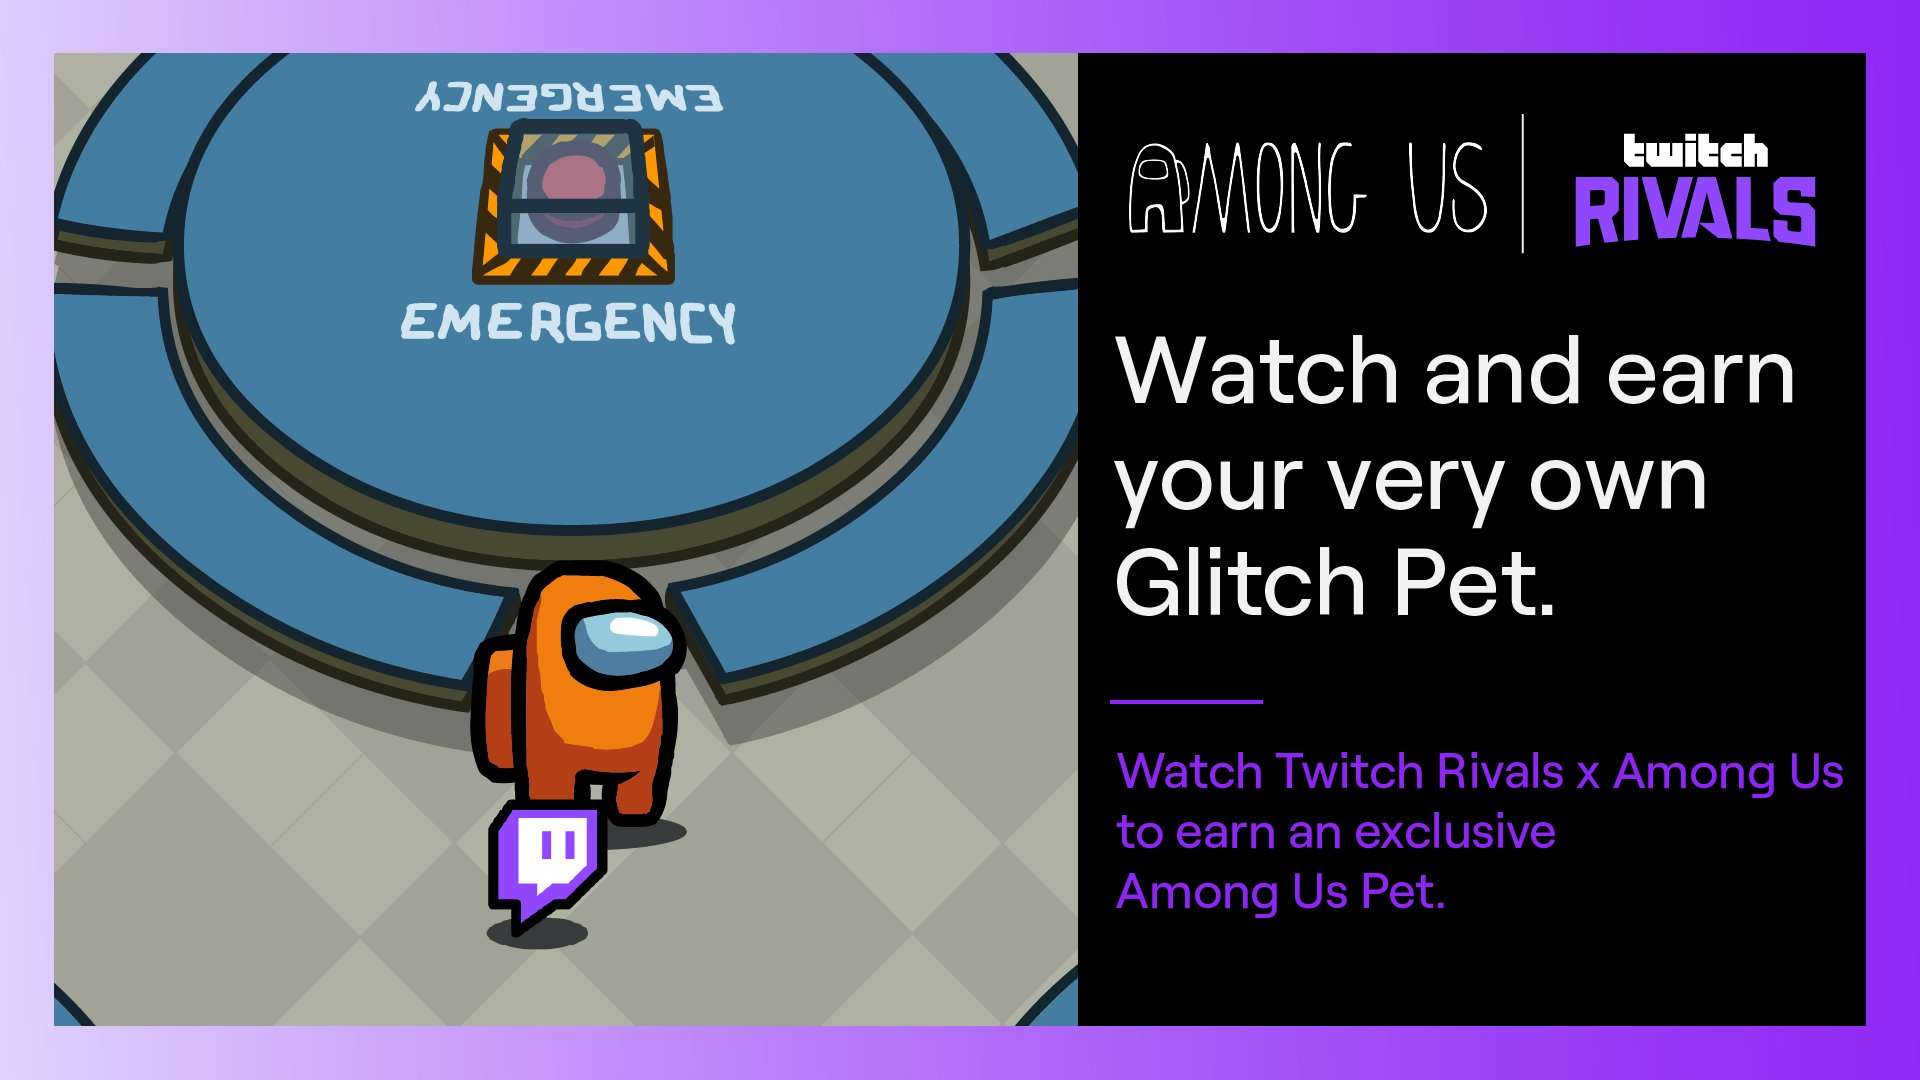 Among Us Glitch pet from Twitch Rivals